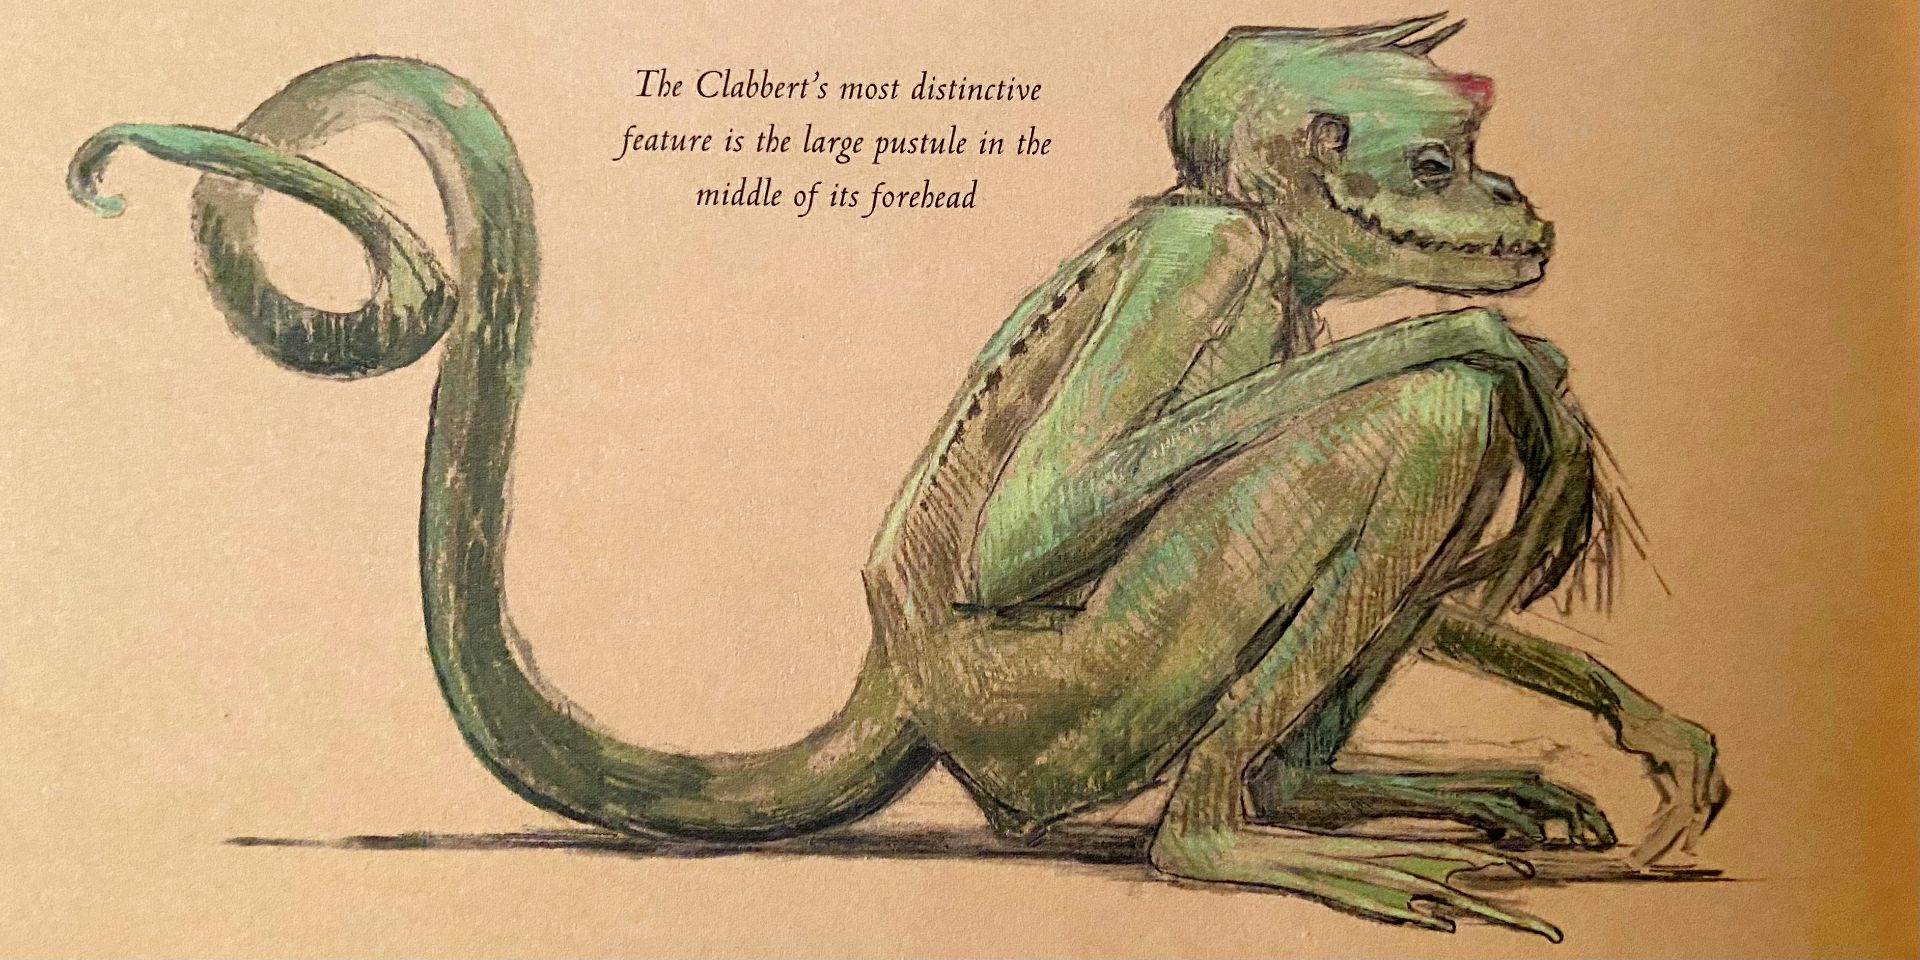 Clabbert in Fantastic Beasts illustrated edition